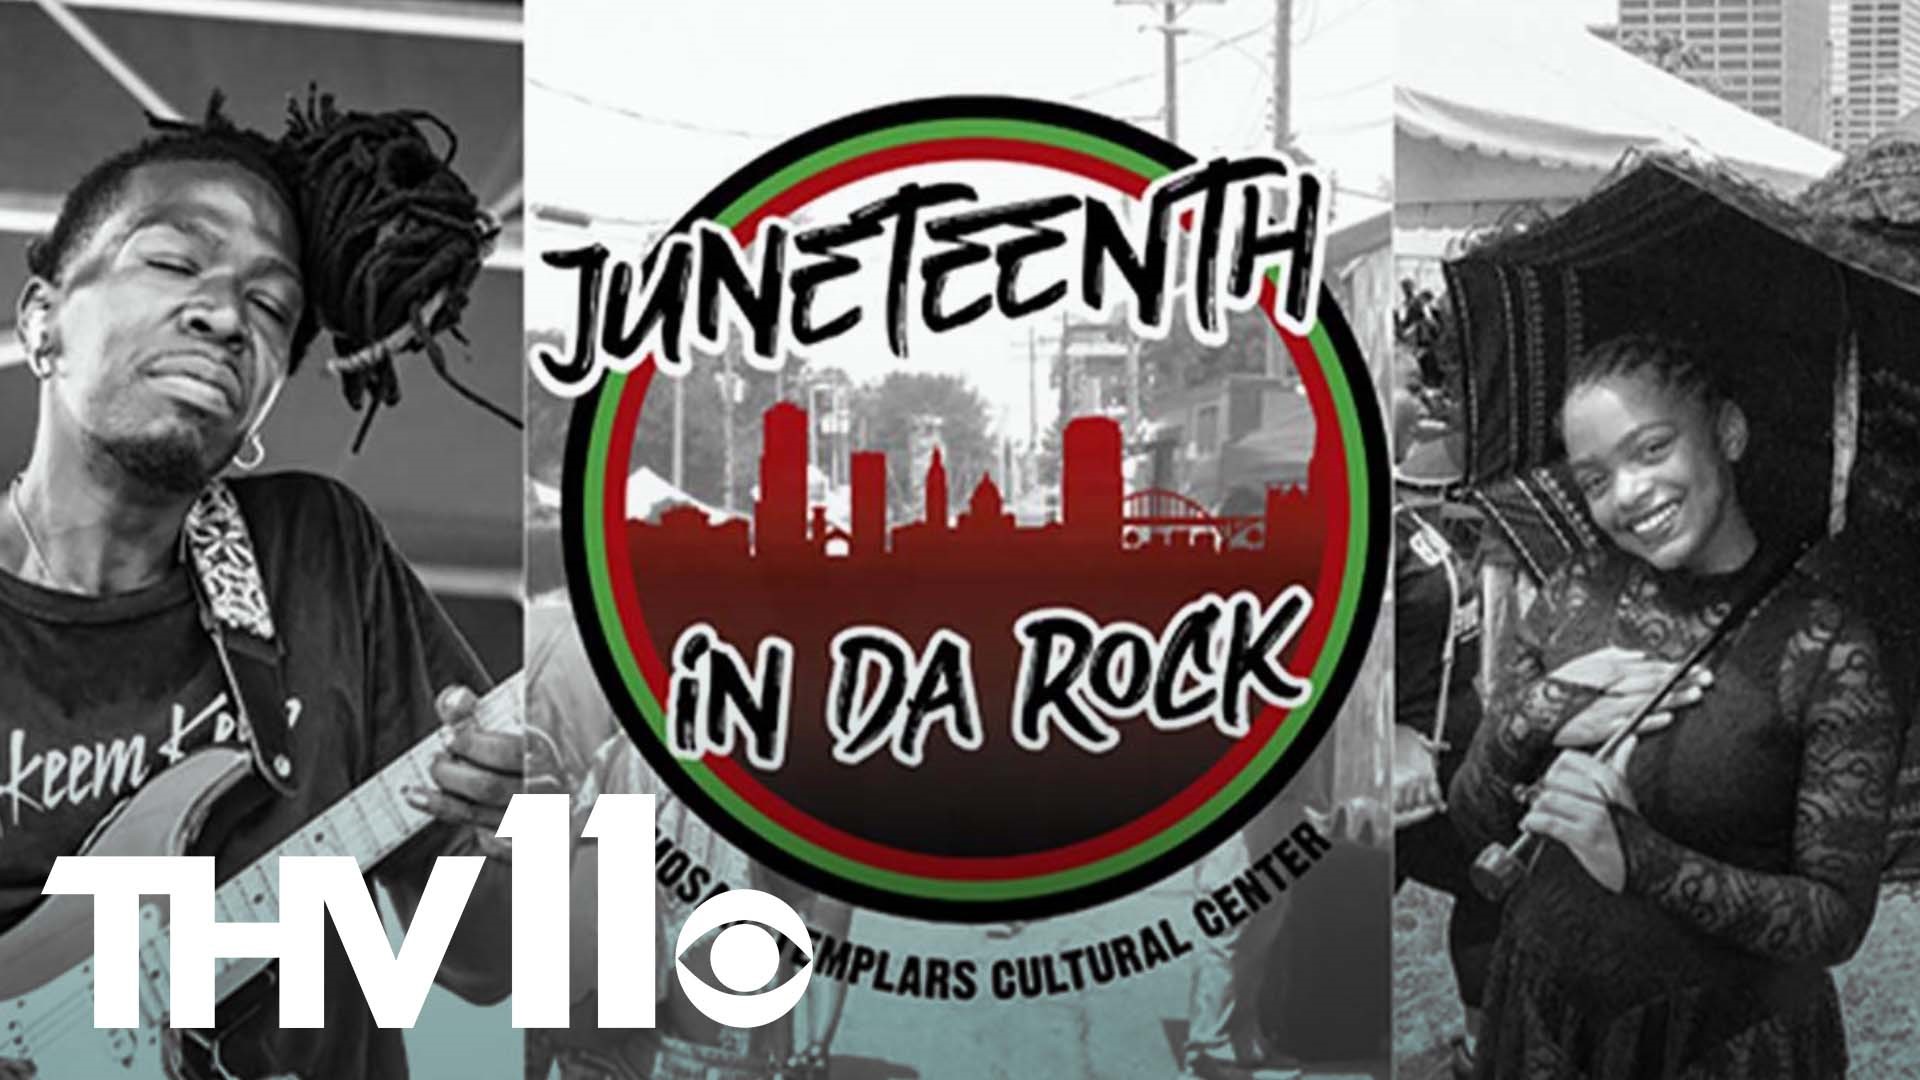 "Juneteenth in Da Rock" is happening on 9th Street this Saturday, and THV11 is the proud media sponsor of the exciting event.